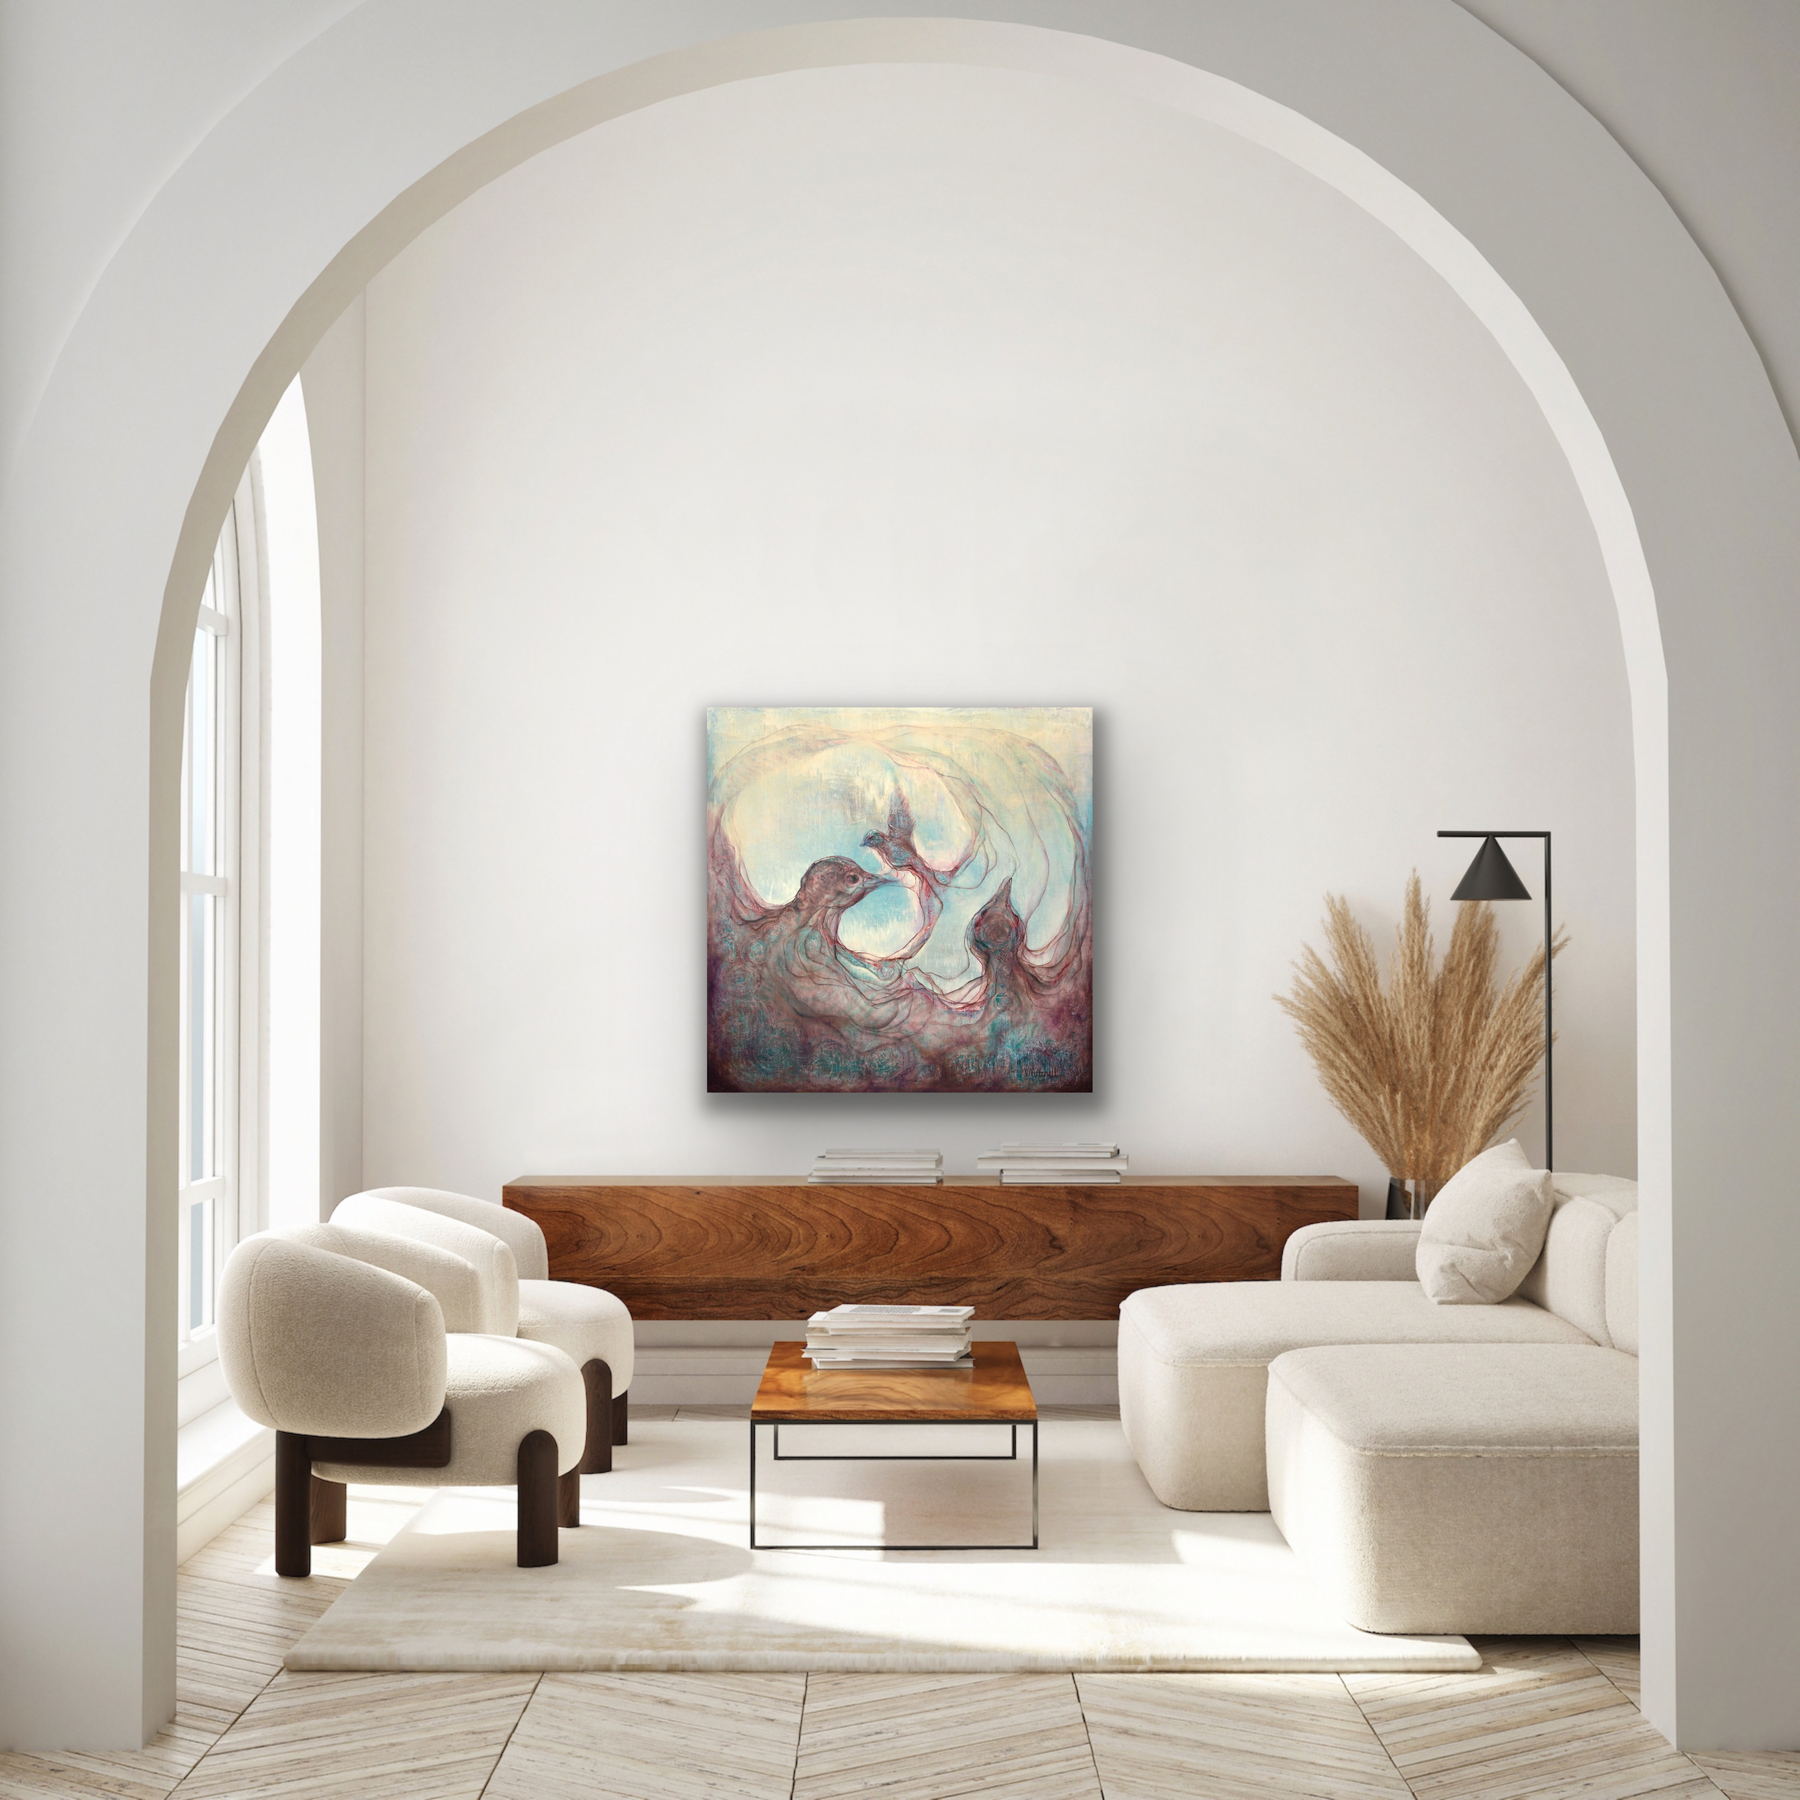 "Renewal" art work is a surreal depiction of the circle of life.  This art piece would look great on a feature wall in your living room, dining room and bedroom.